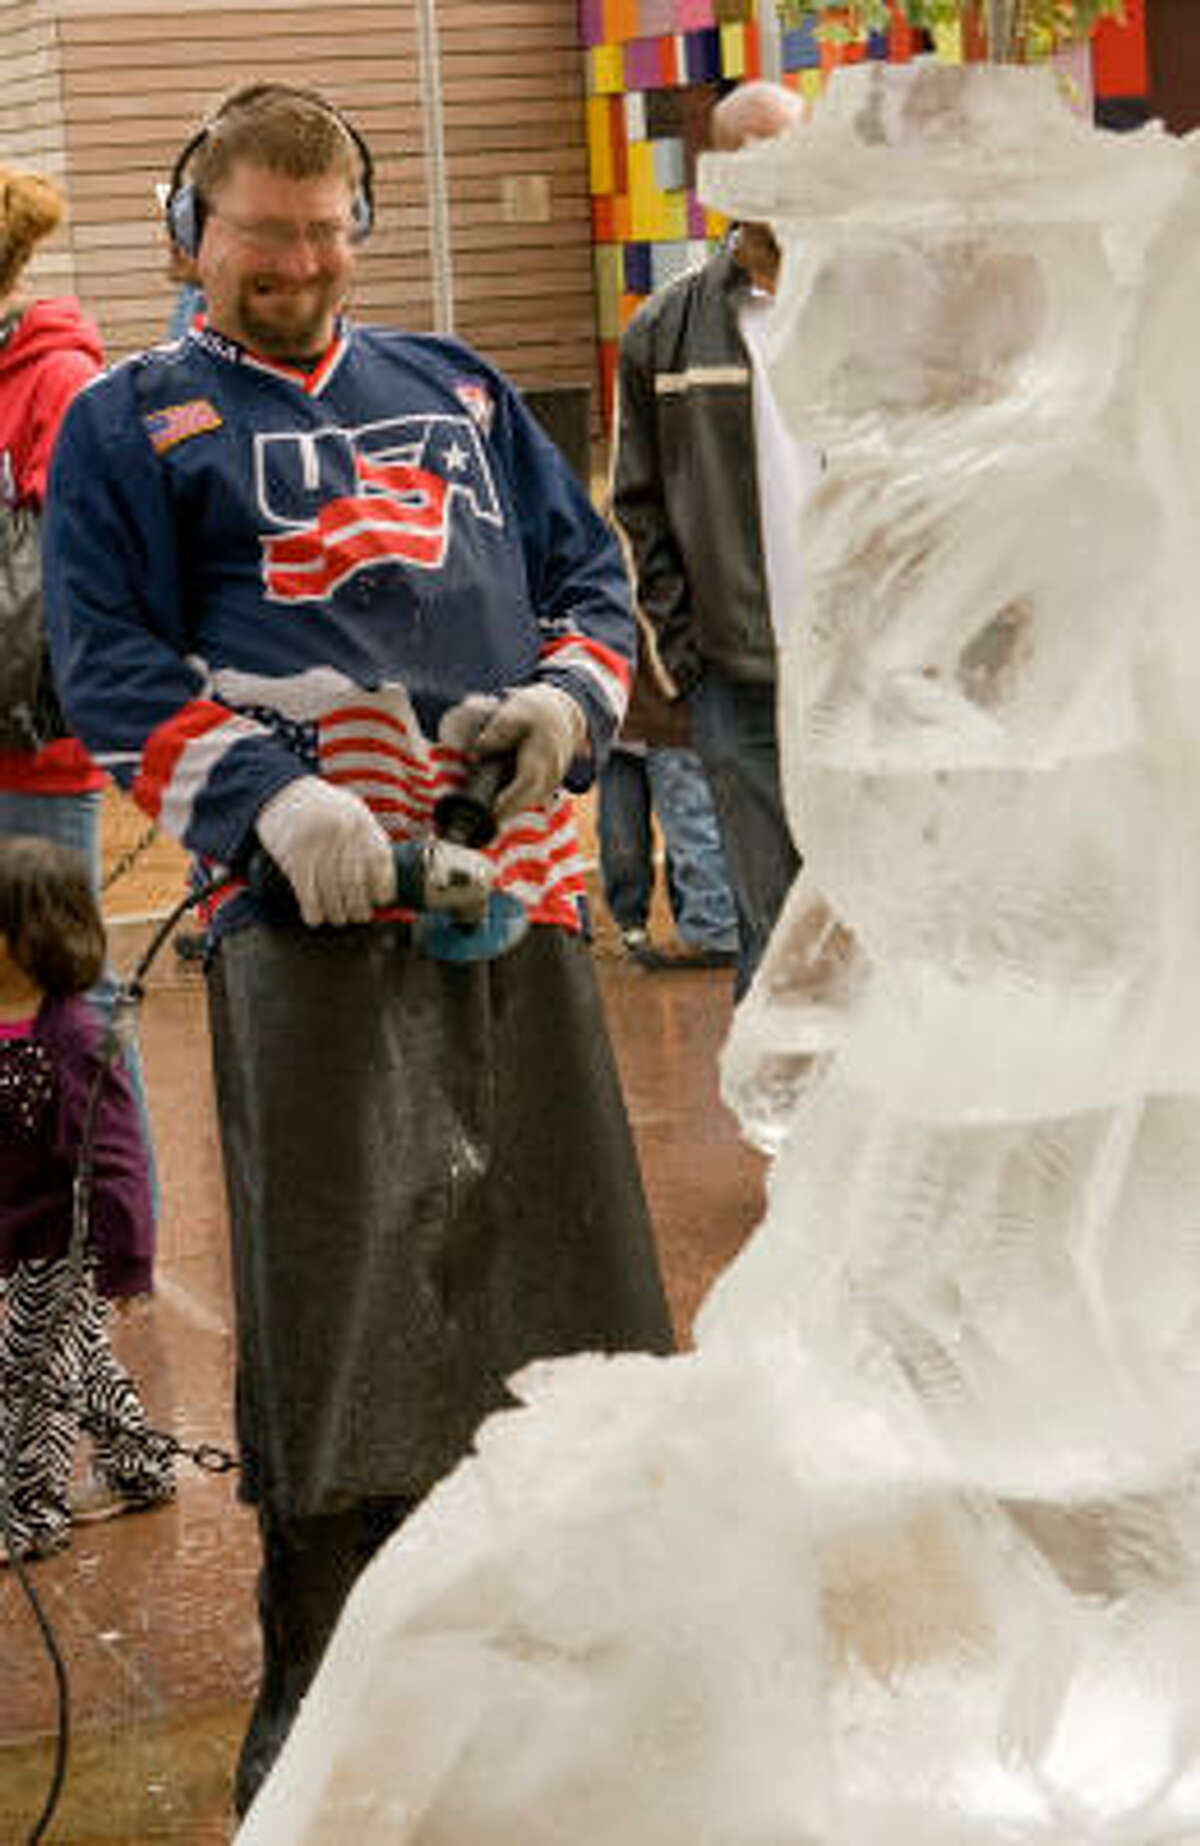 Dan "Hollywood" Rebholz of Chicago steps back to view his sculpture. The sculptors competed in an ice sculptor contest Saturday in downtown Houston.